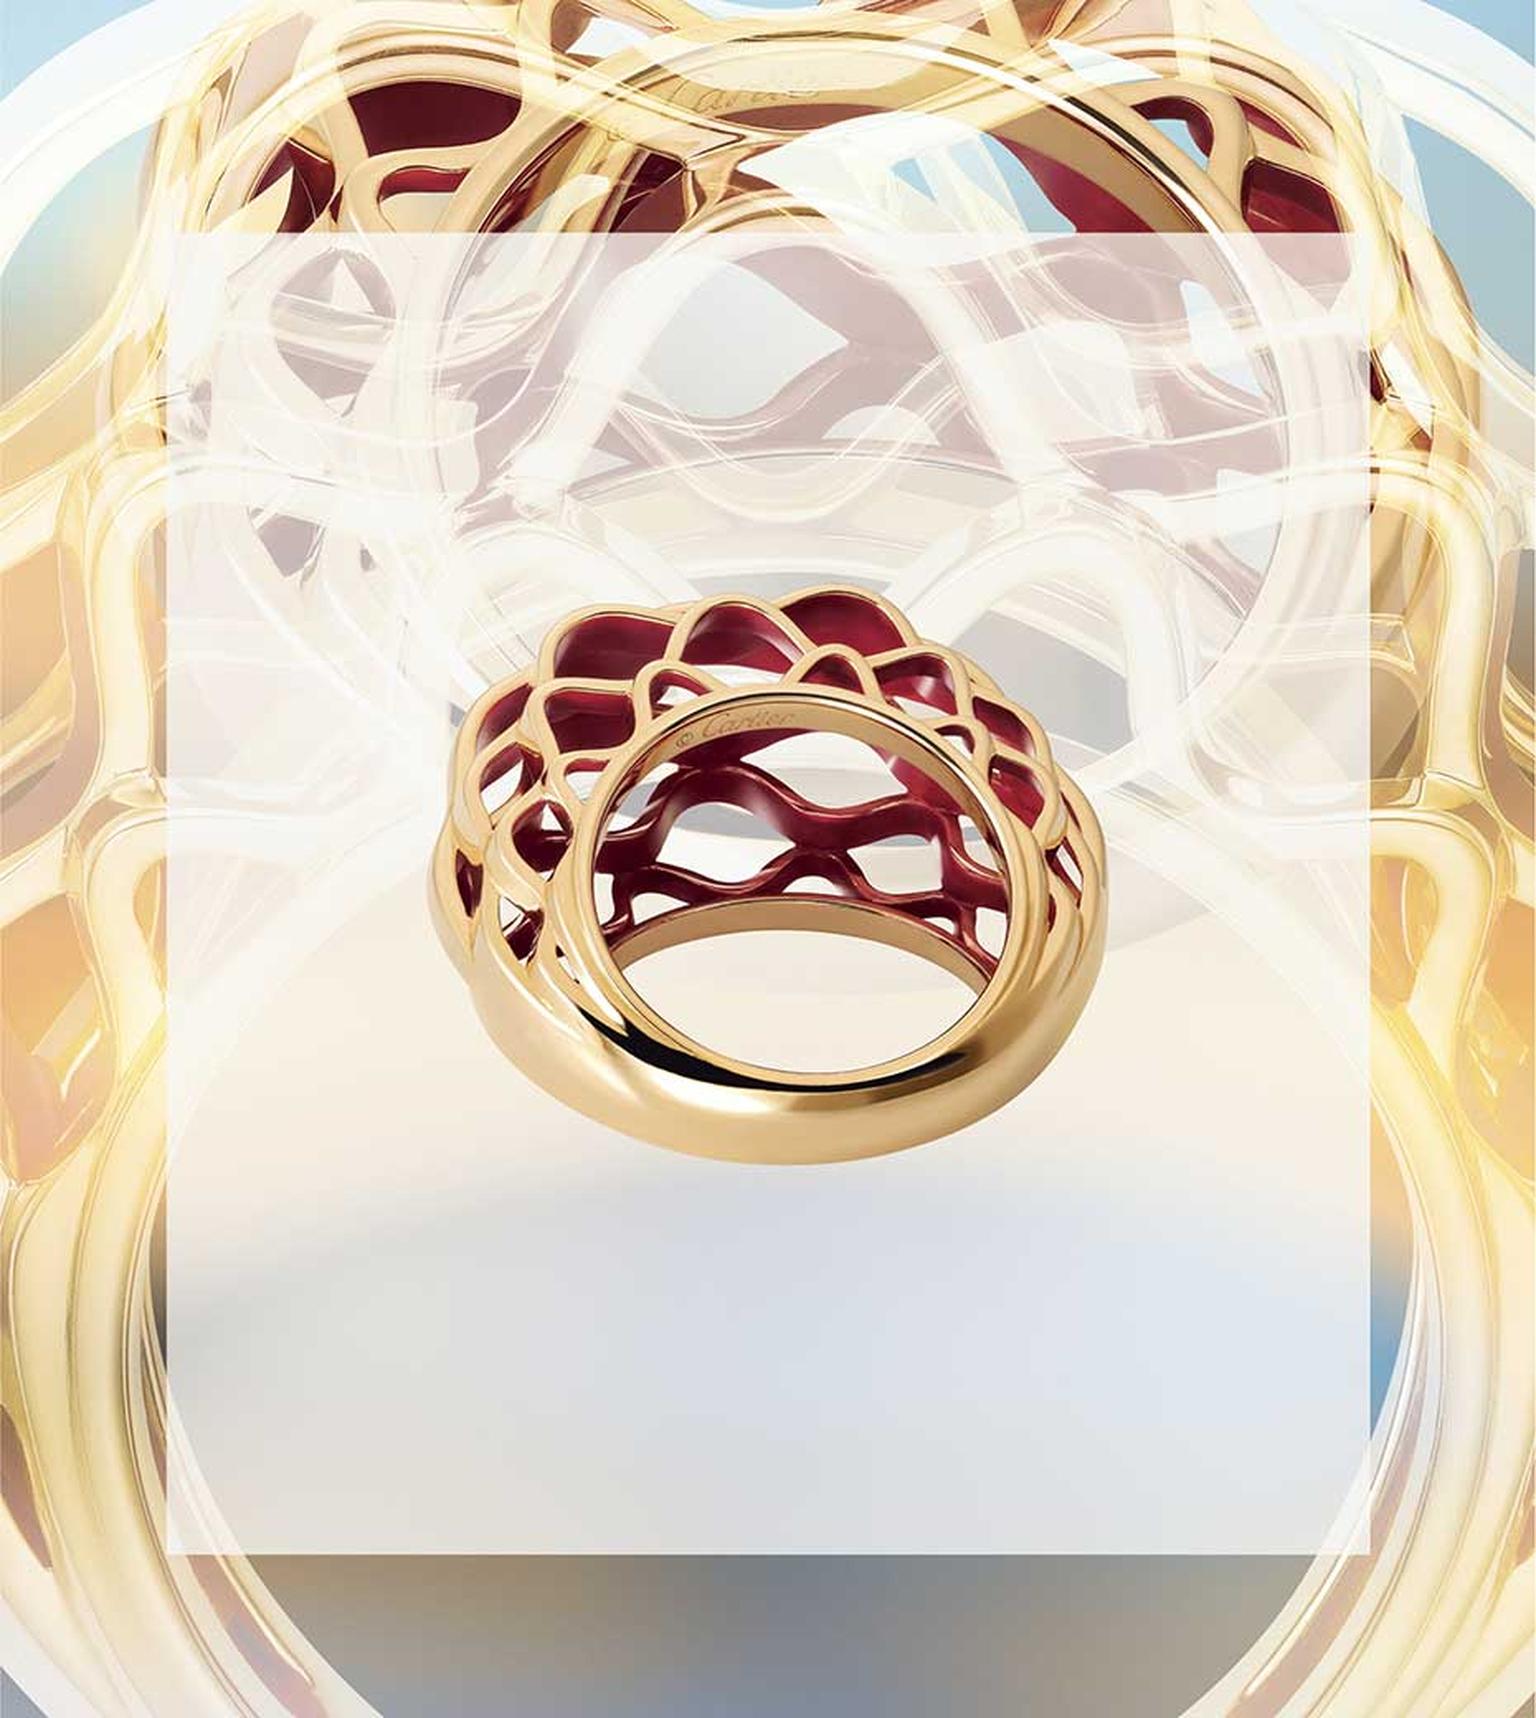 The metalwork of the glass dome of the Grand Palais is interpreted by Cartier in this dramatic new Paris Nouvelle Vague ring, which resembles golden basketwork.